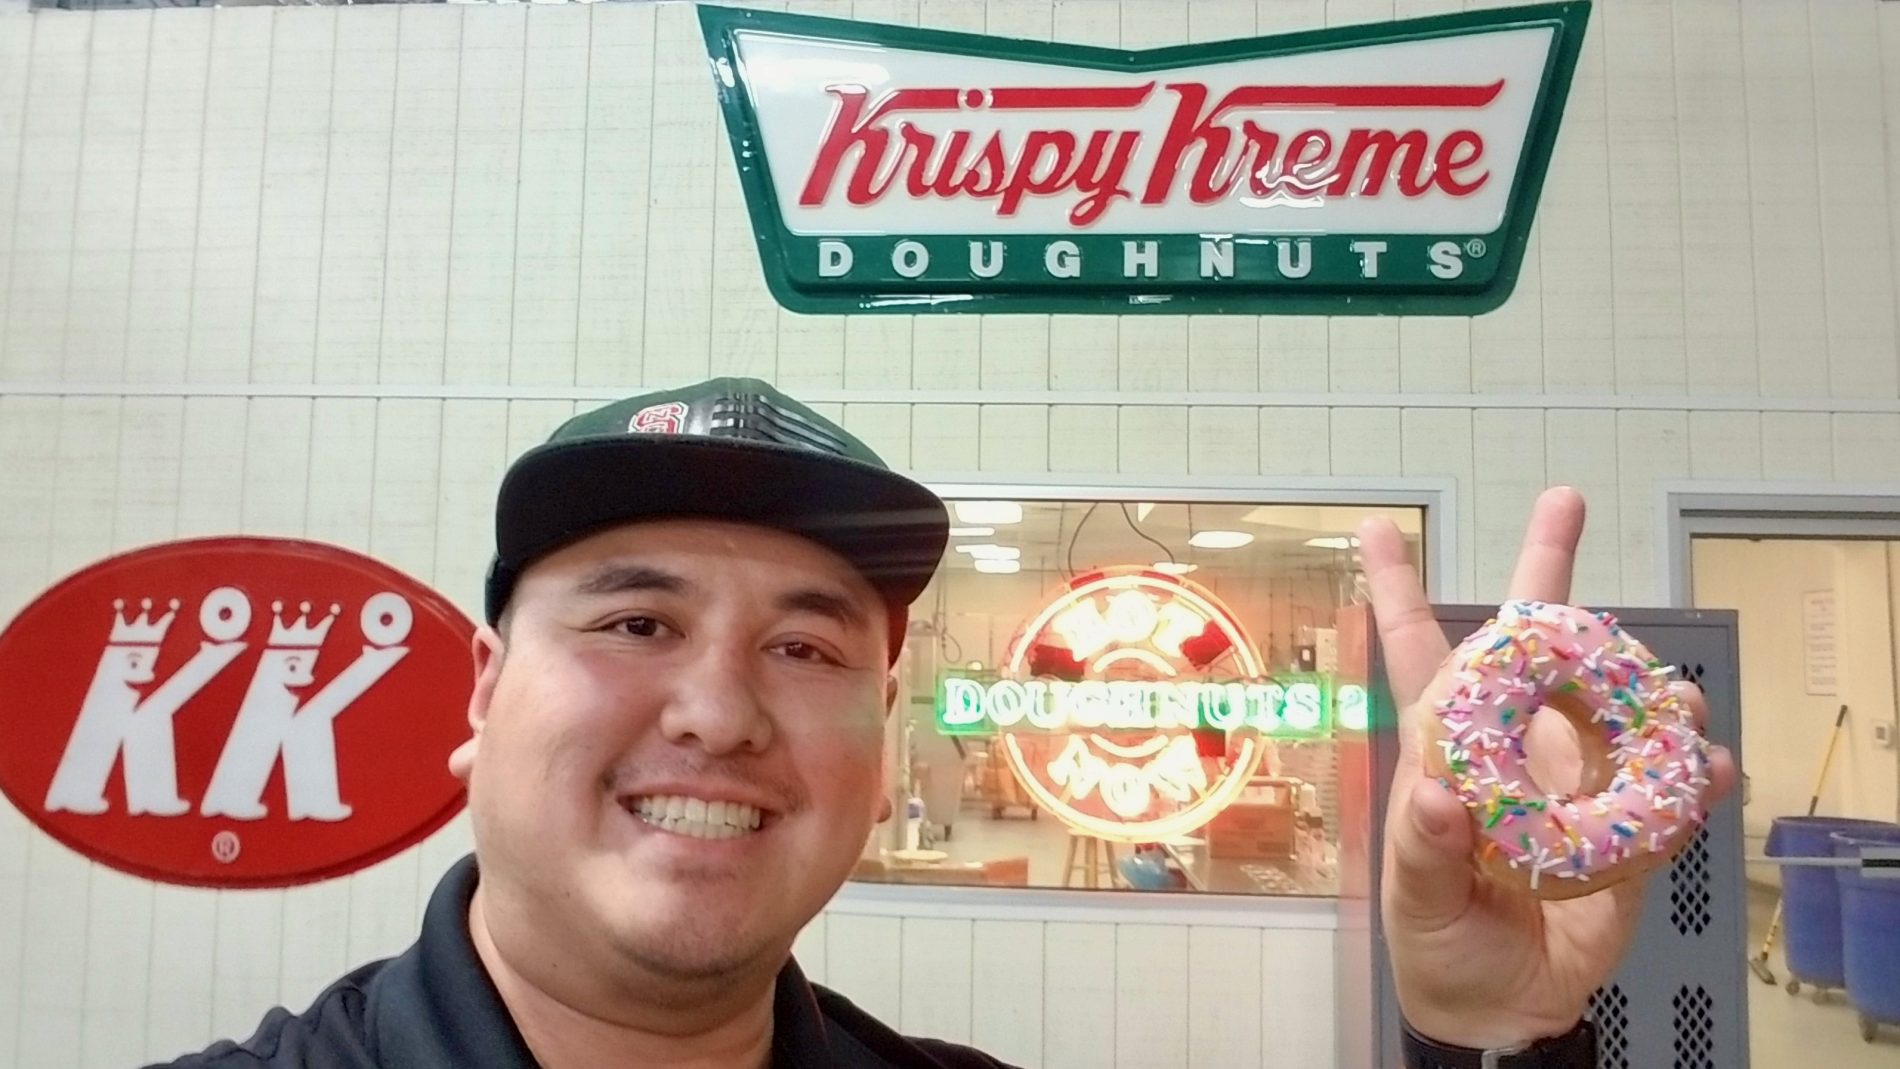 Jose Tan holds aloft a donut while standing in front of a Krispy Kreme wall sign.